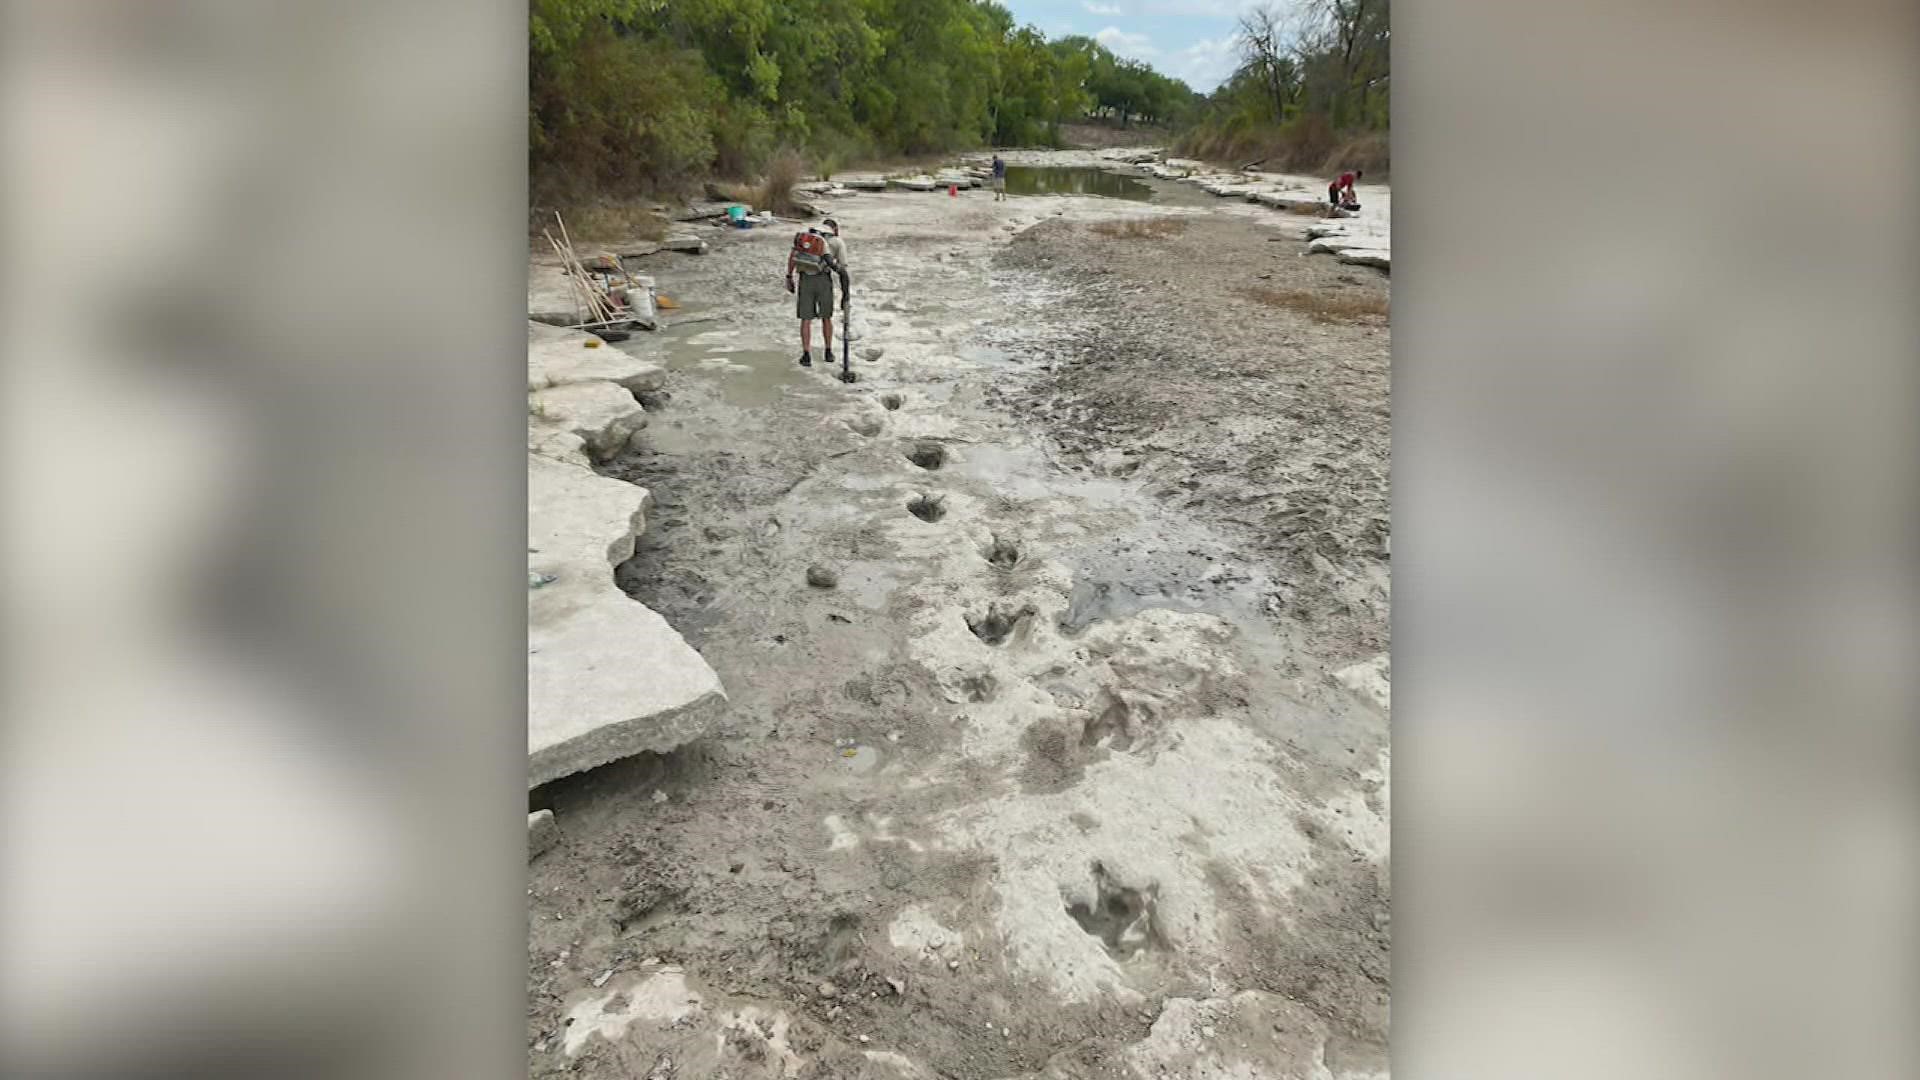 "When it starts raining they will fill up with water and mud. Most likely we will not see them like this again for a very long time," the park said.